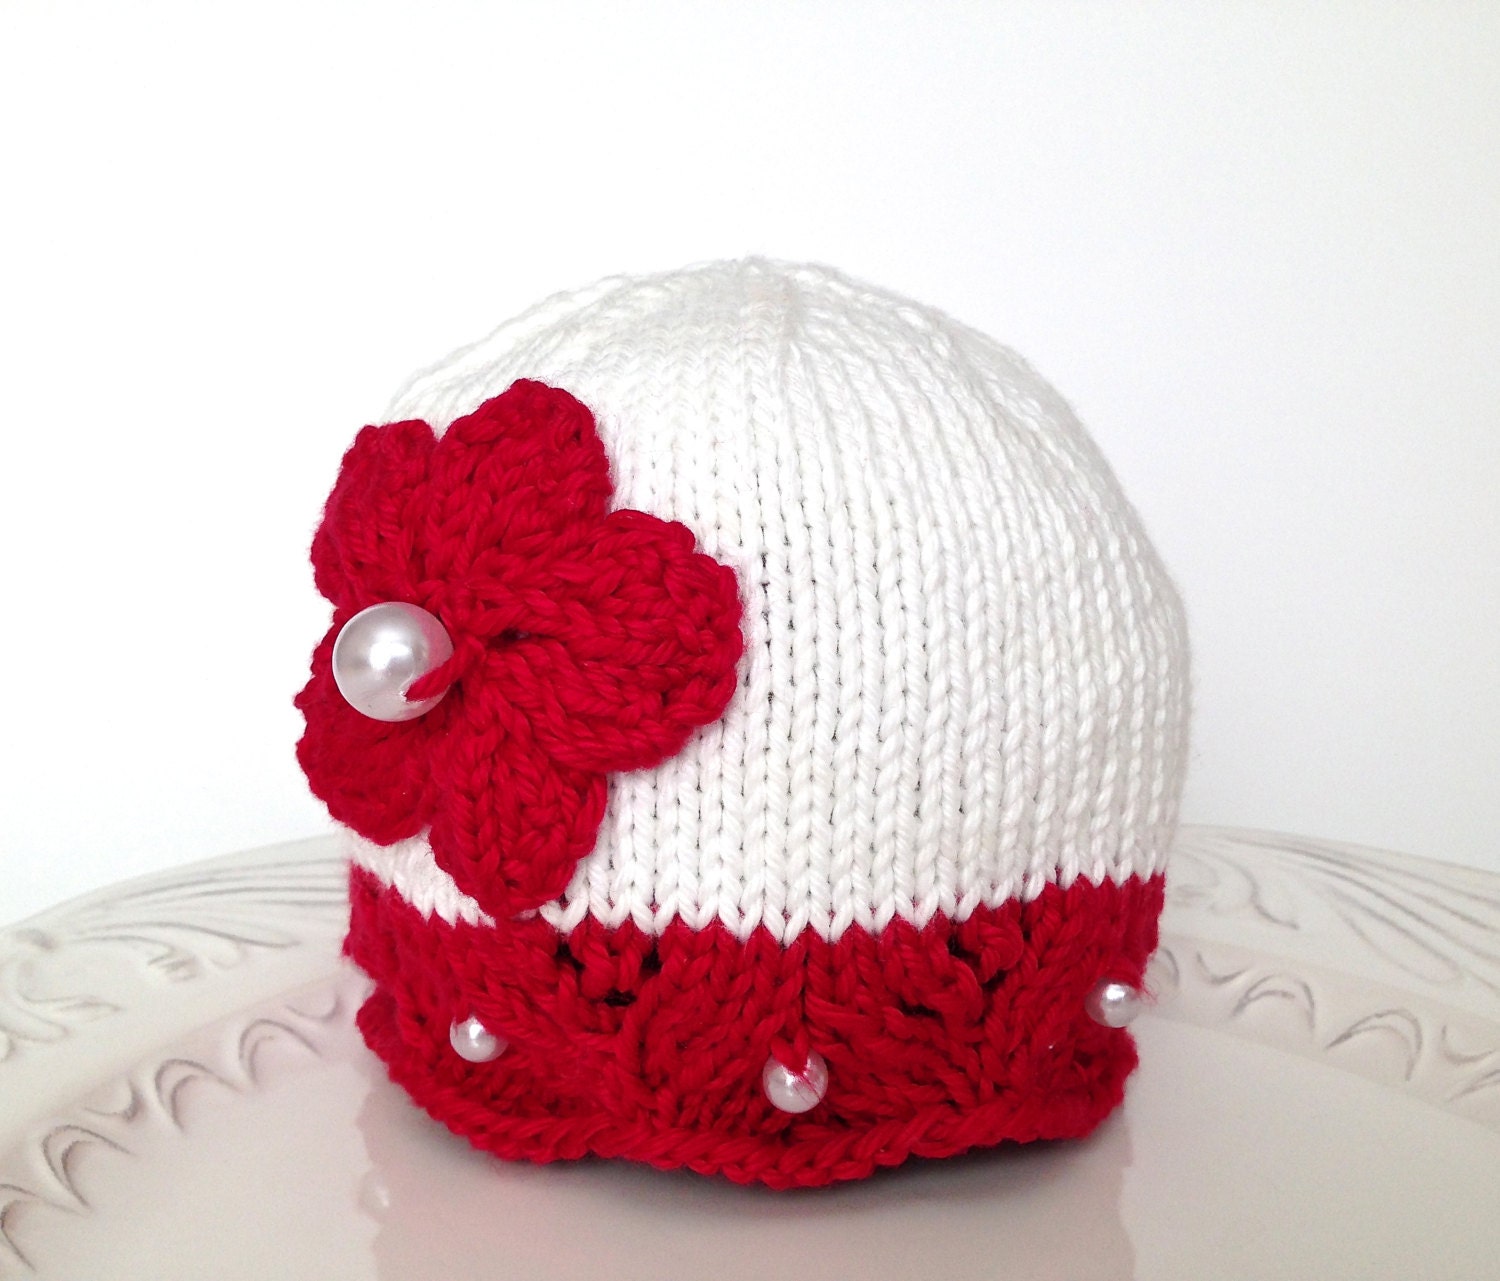 Knitted hat for baby 0-3 months, white and red - TinyLoveGifts